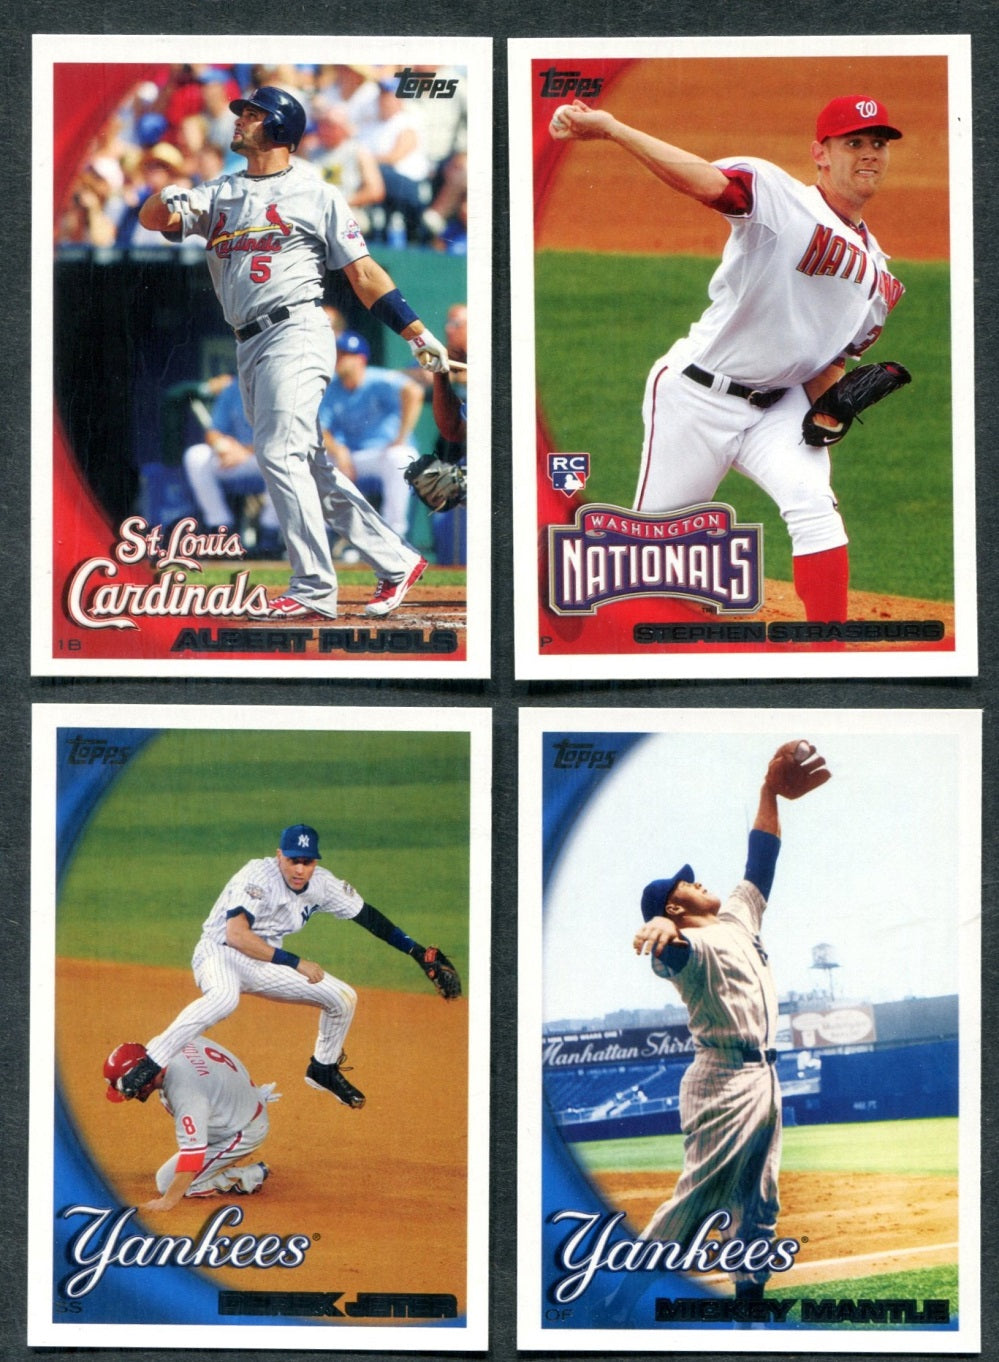 2010 Topps Baseball Complete Set (From Retail Factory) NM/MT MT (661) (23-196)